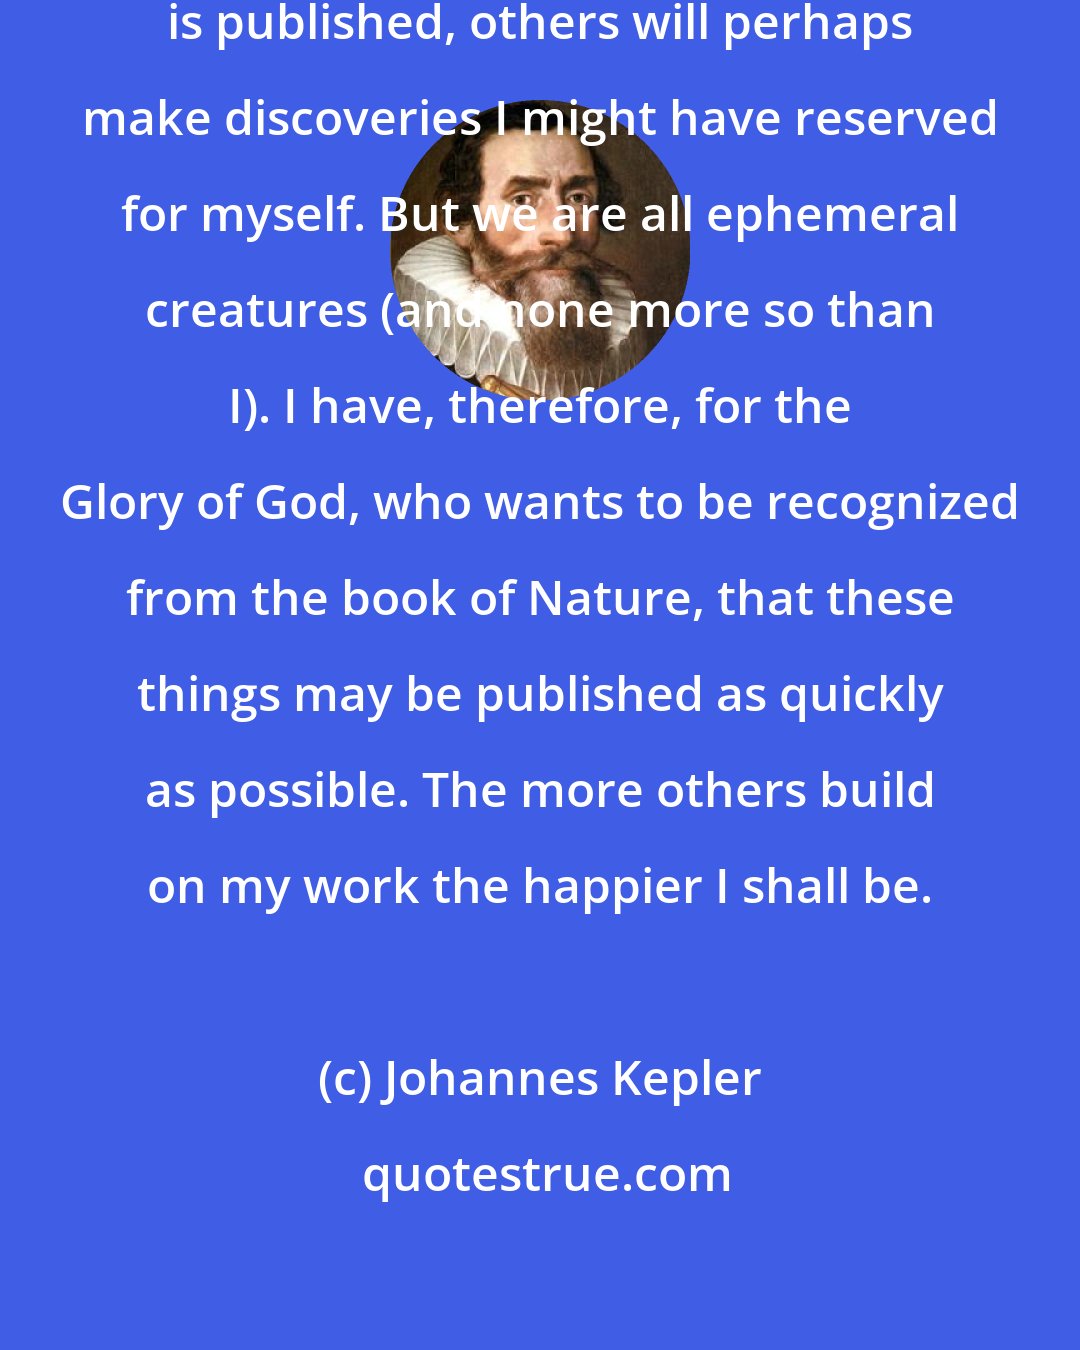 Johannes Kepler: If this [the Mysterium cosmographicum] is published, others will perhaps make discoveries I might have reserved for myself. But we are all ephemeral creatures (and none more so than I). I have, therefore, for the Glory of God, who wants to be recognized from the book of Nature, that these things may be published as quickly as possible. The more others build on my work the happier I shall be.